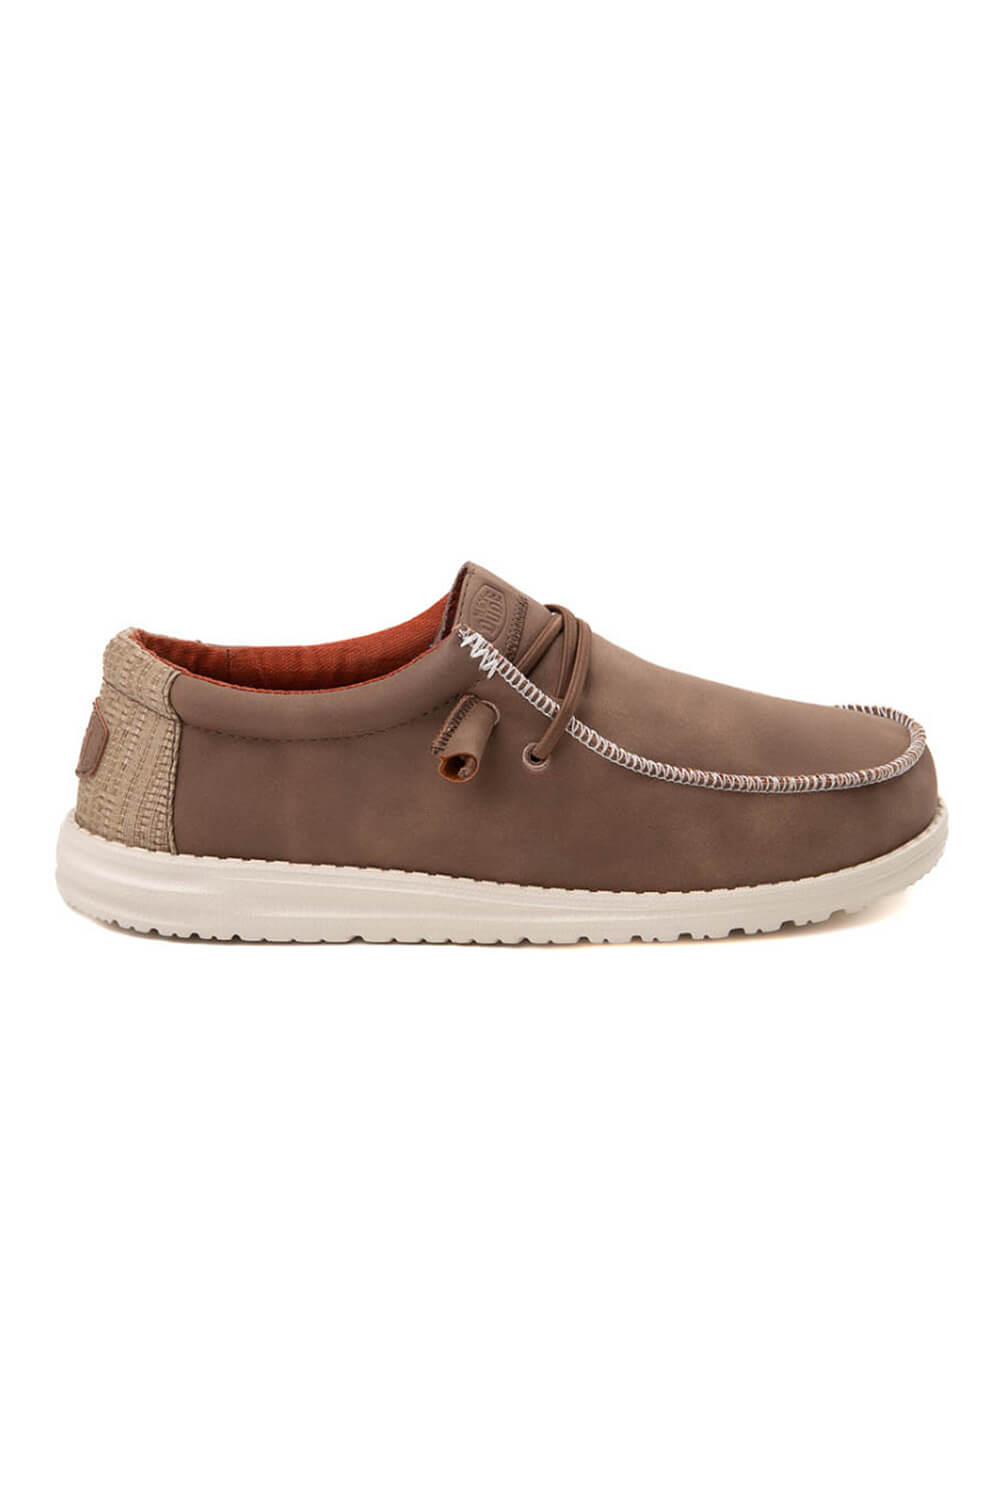 Wally Fabricated Leather in Tan by Hey Dude Shoes